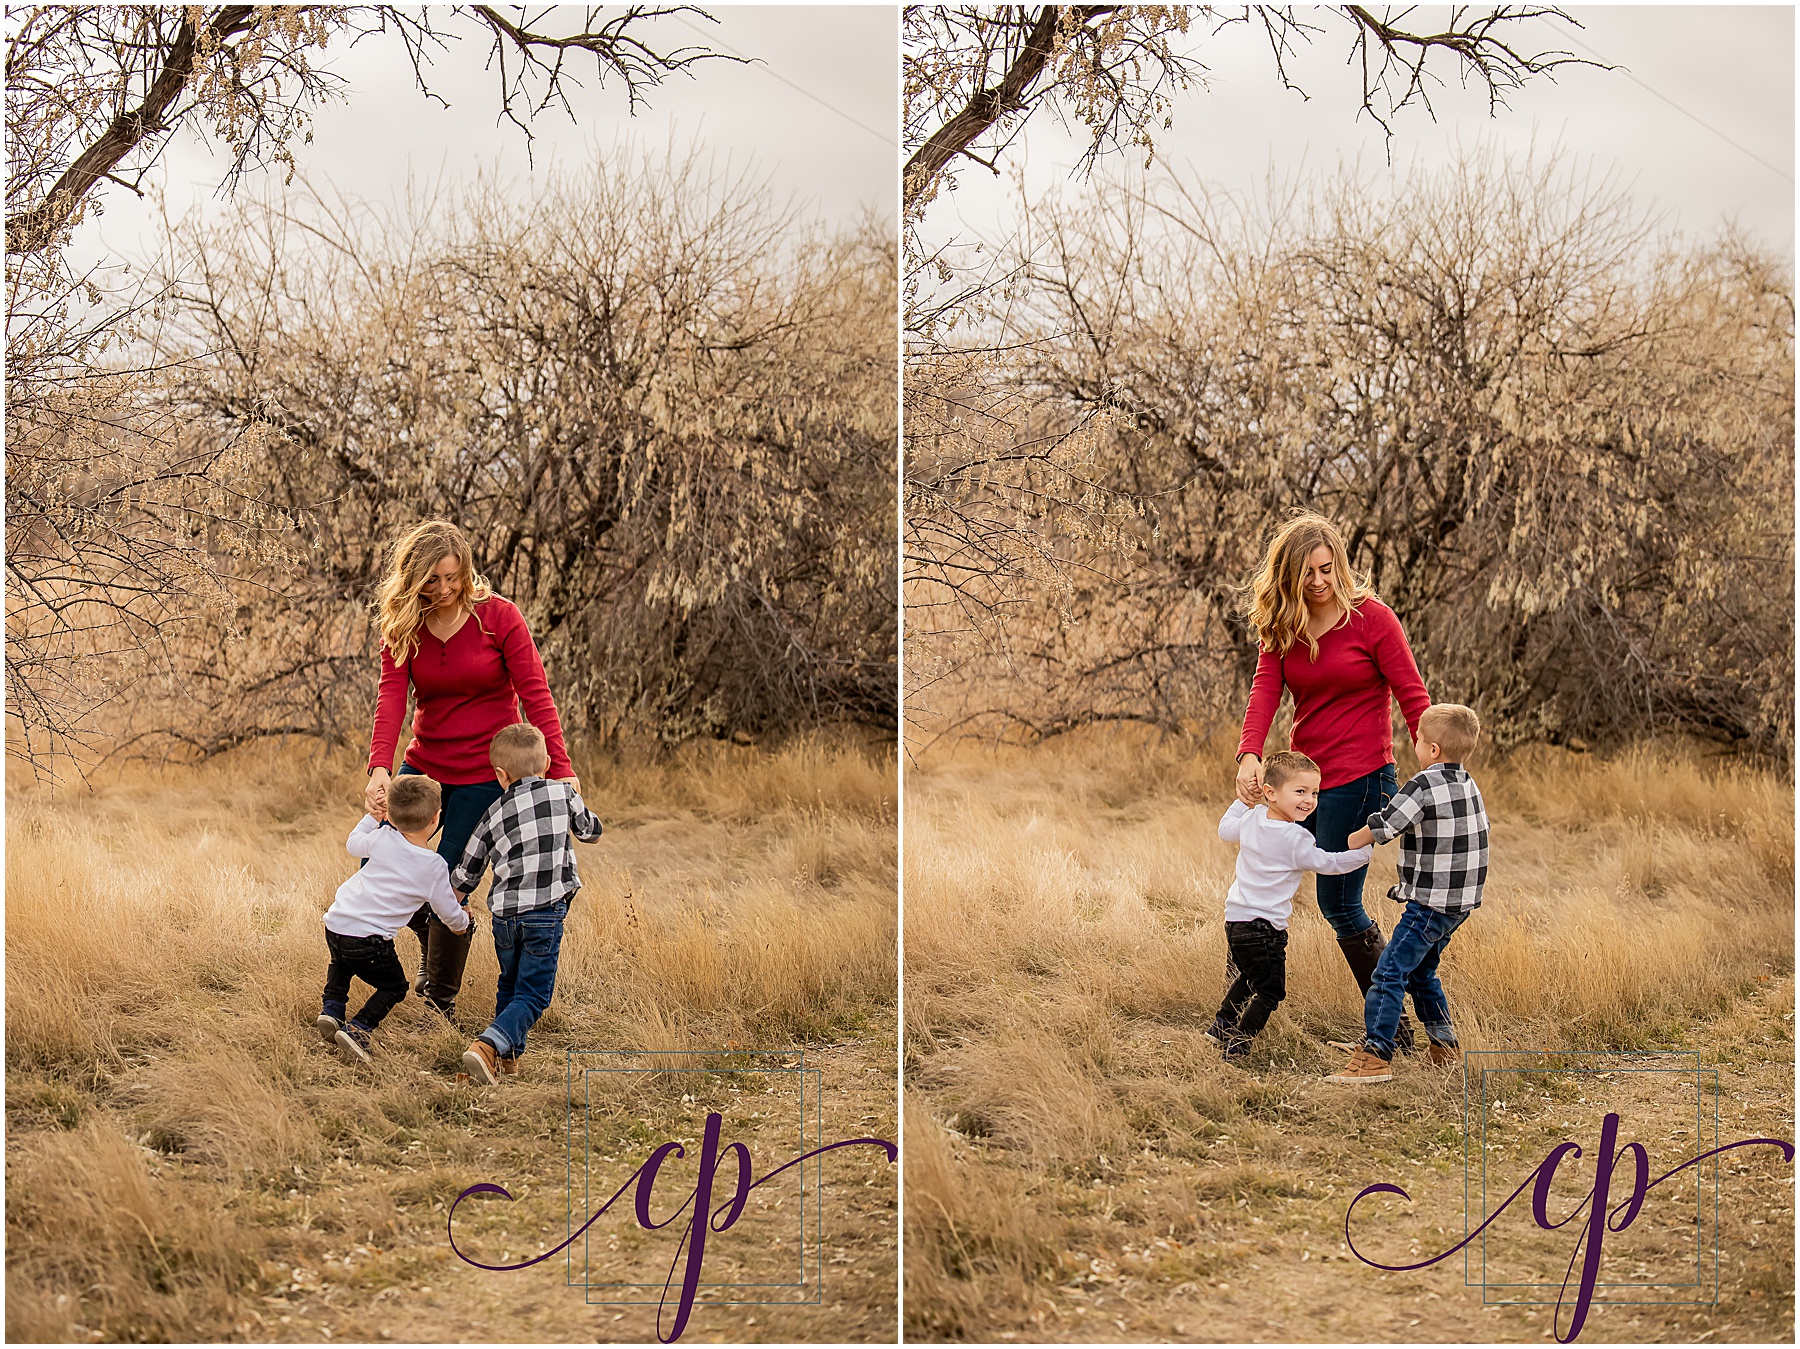 Westminster Family Portraits, Colorado Family Photographer, boy mom, toddlers, family photos, red and plaid, smiling faces, Denver Photographer, Colorado Photographer, Family Photos, Laughter, Destination Photographer, Costa Rica Photographer, Rustic, Winter, Dancing, Laughter, Photos with mom